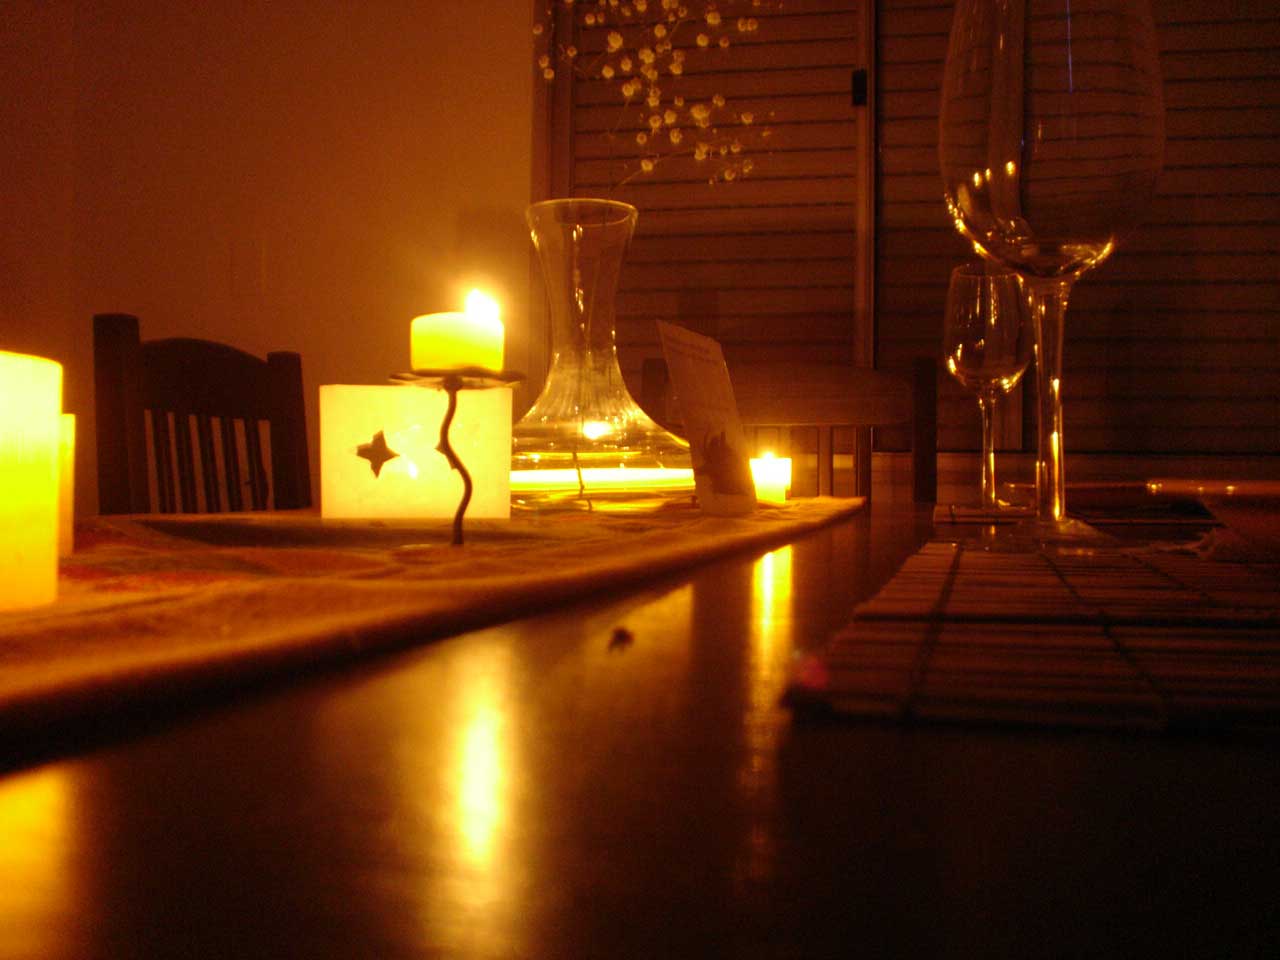 lit candles in the dining room on a table